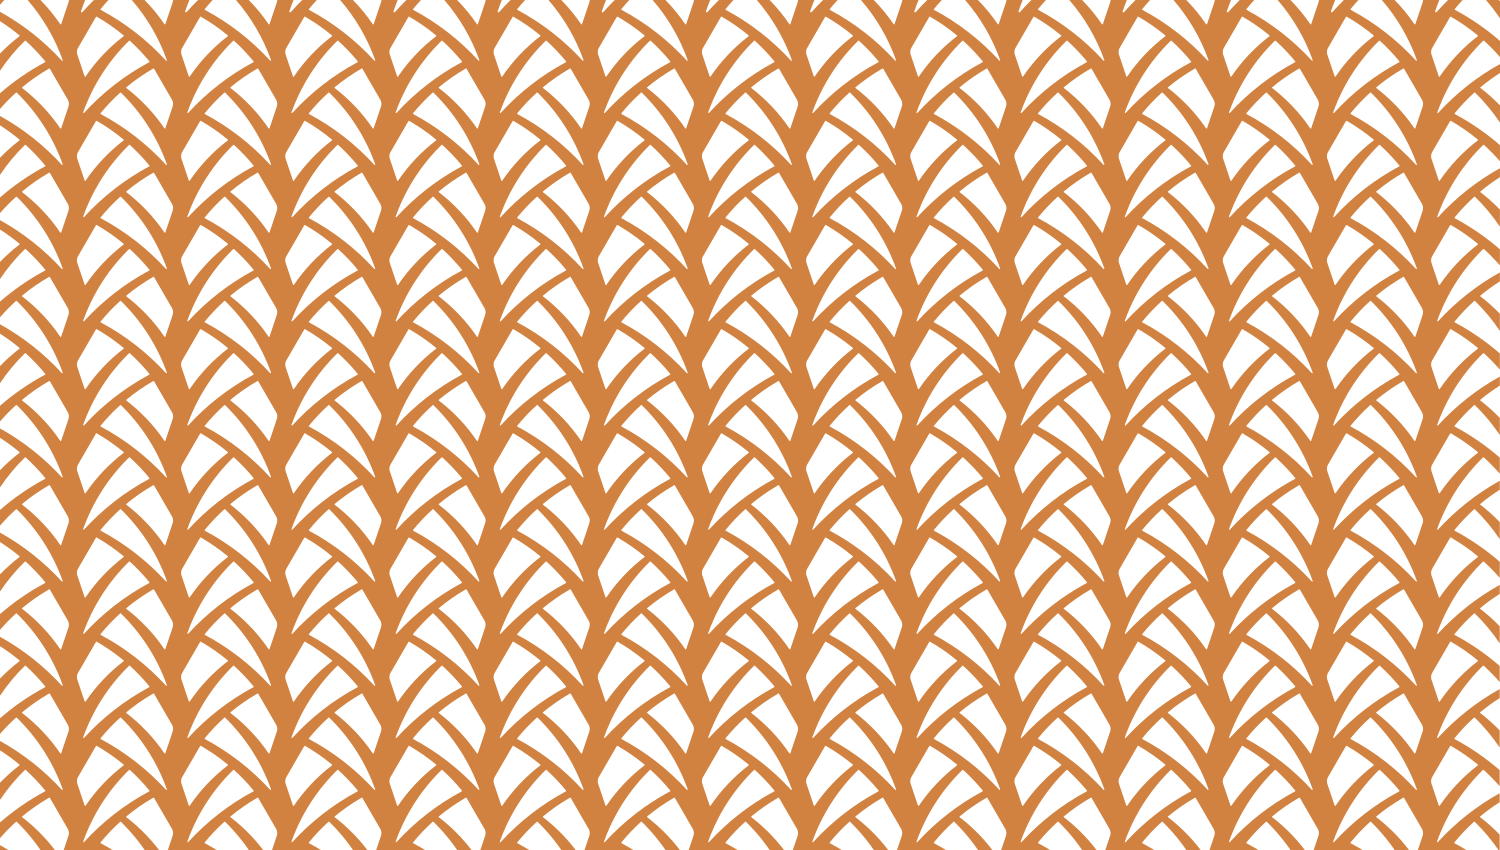 Parasoleil™ Bluestem© pattern displayed with a ochre color overlay